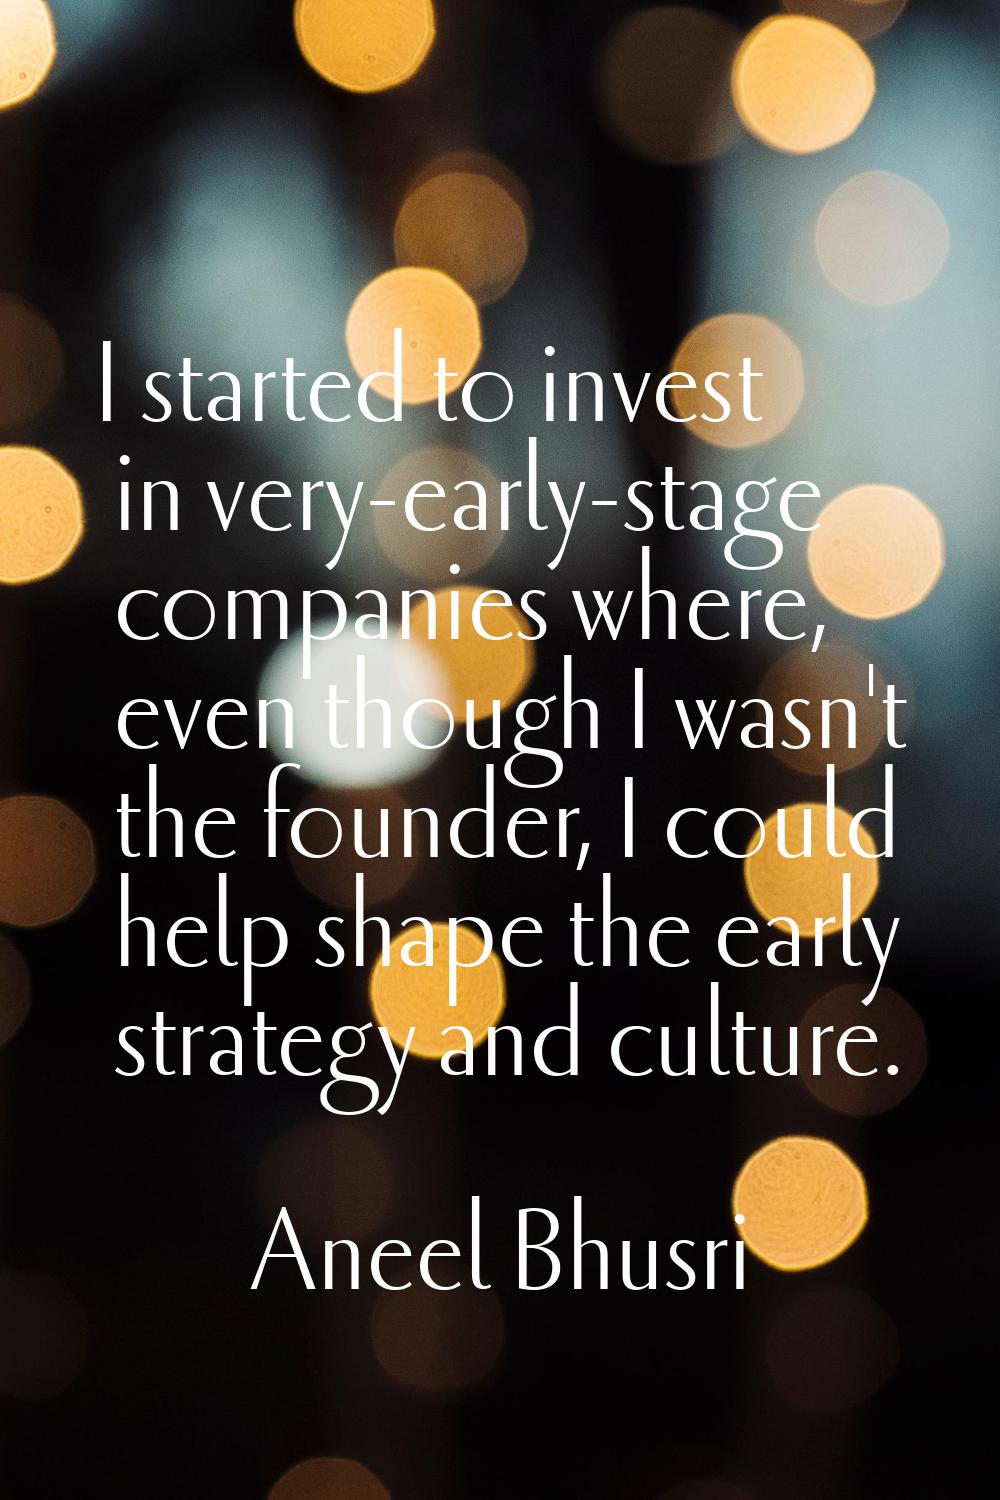 I started to invest in very-early-stage companies where, even though I wasn't the founder, I could 